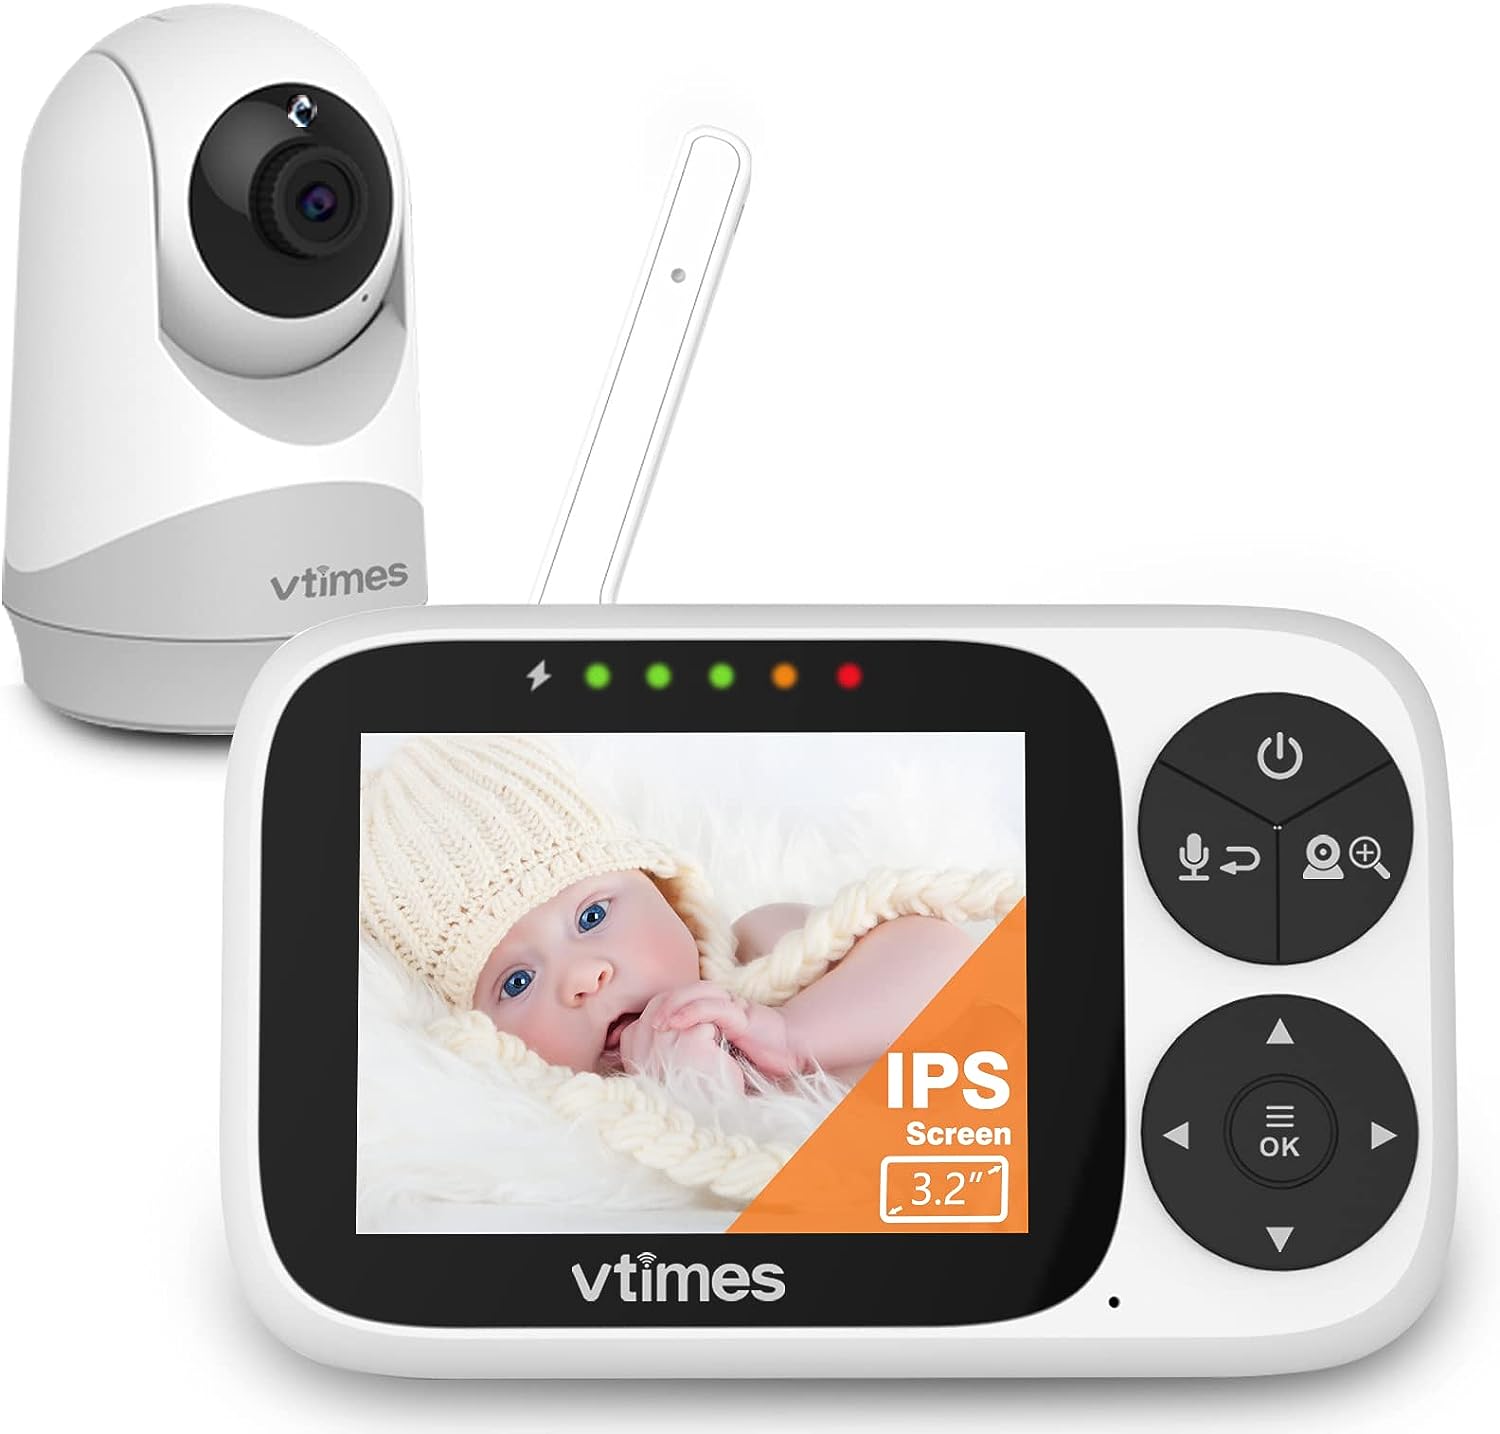 VTimes Video Baby Monitor with Camera and Audio, 3.2